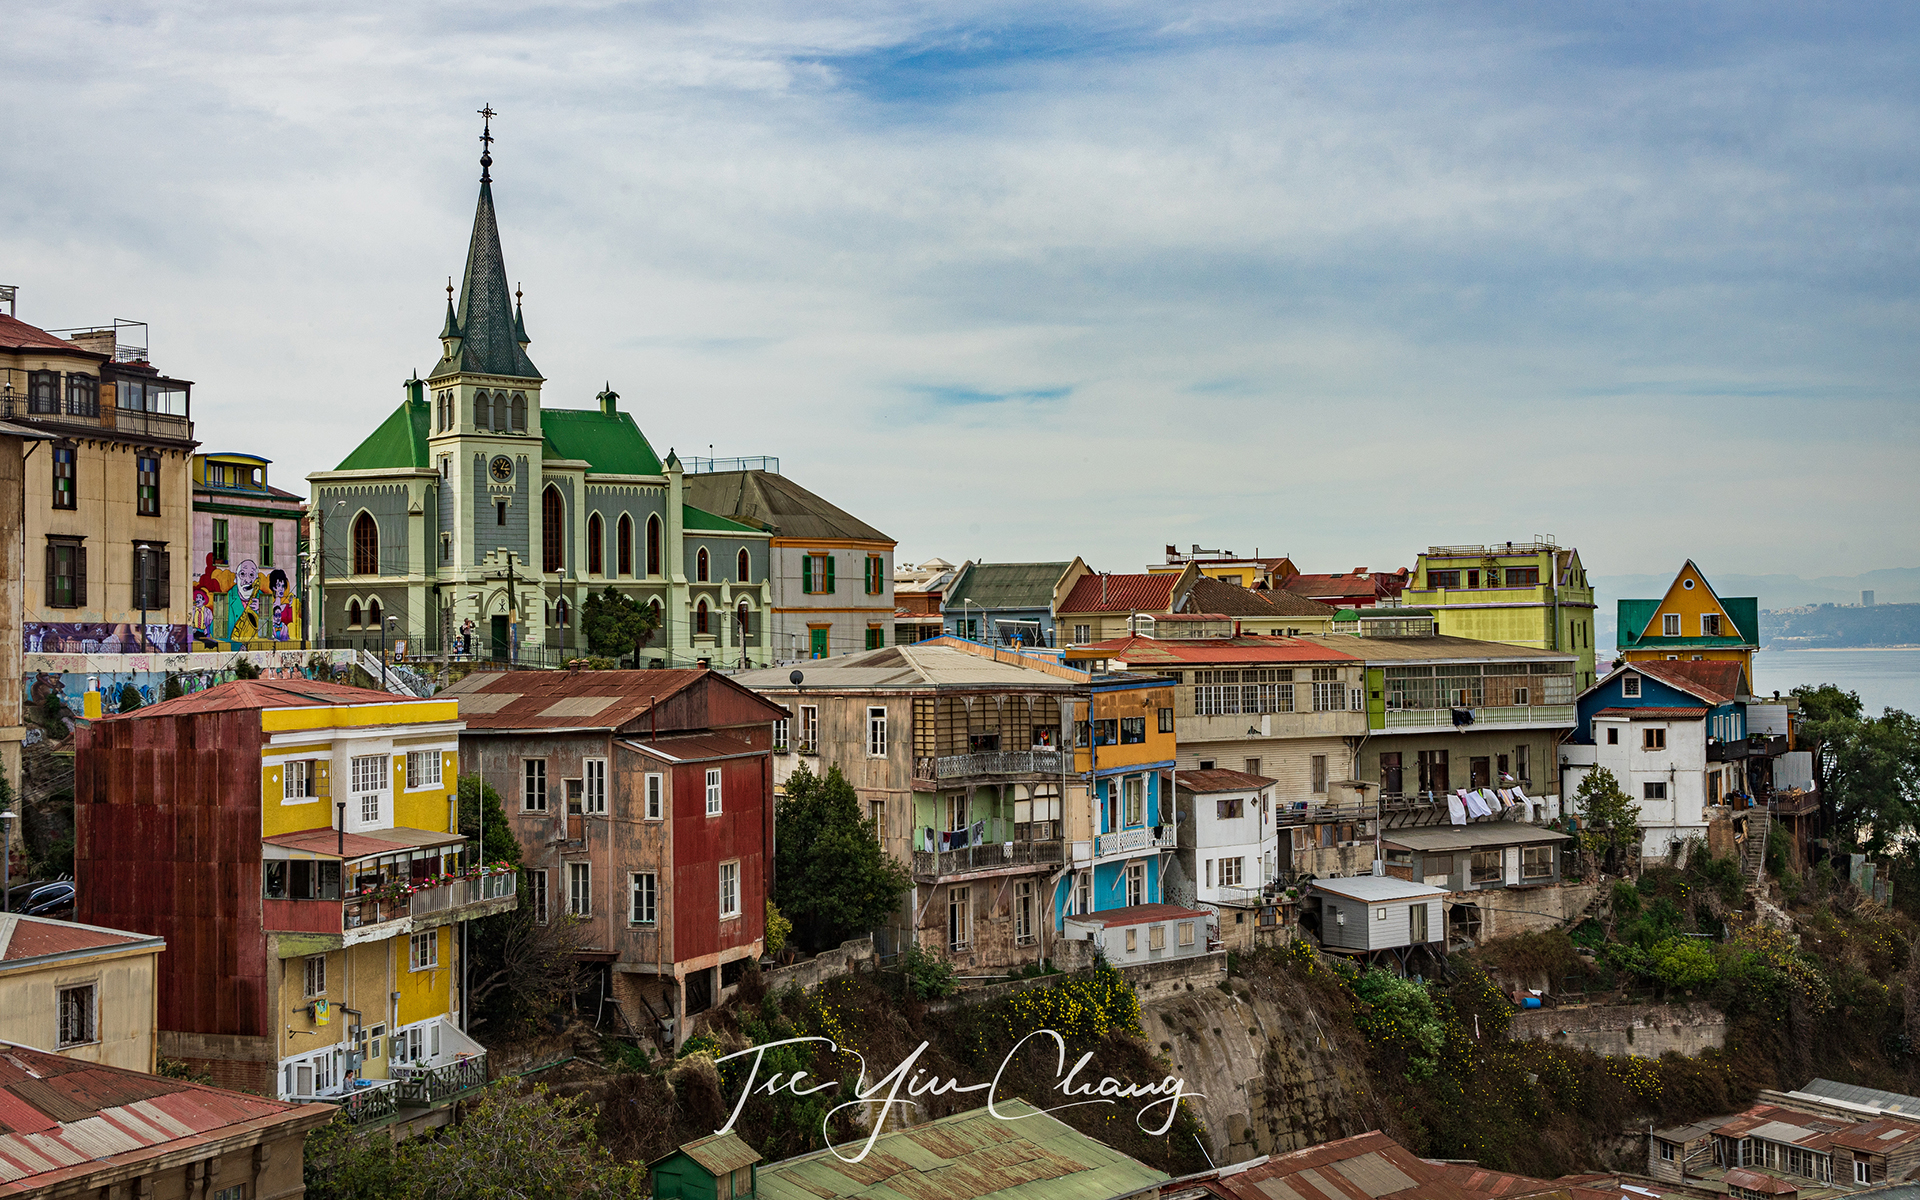 Described by Lonely Planet as “a wonderful mess”, Valparaiso is certainly one of Chile’s most unusual cities